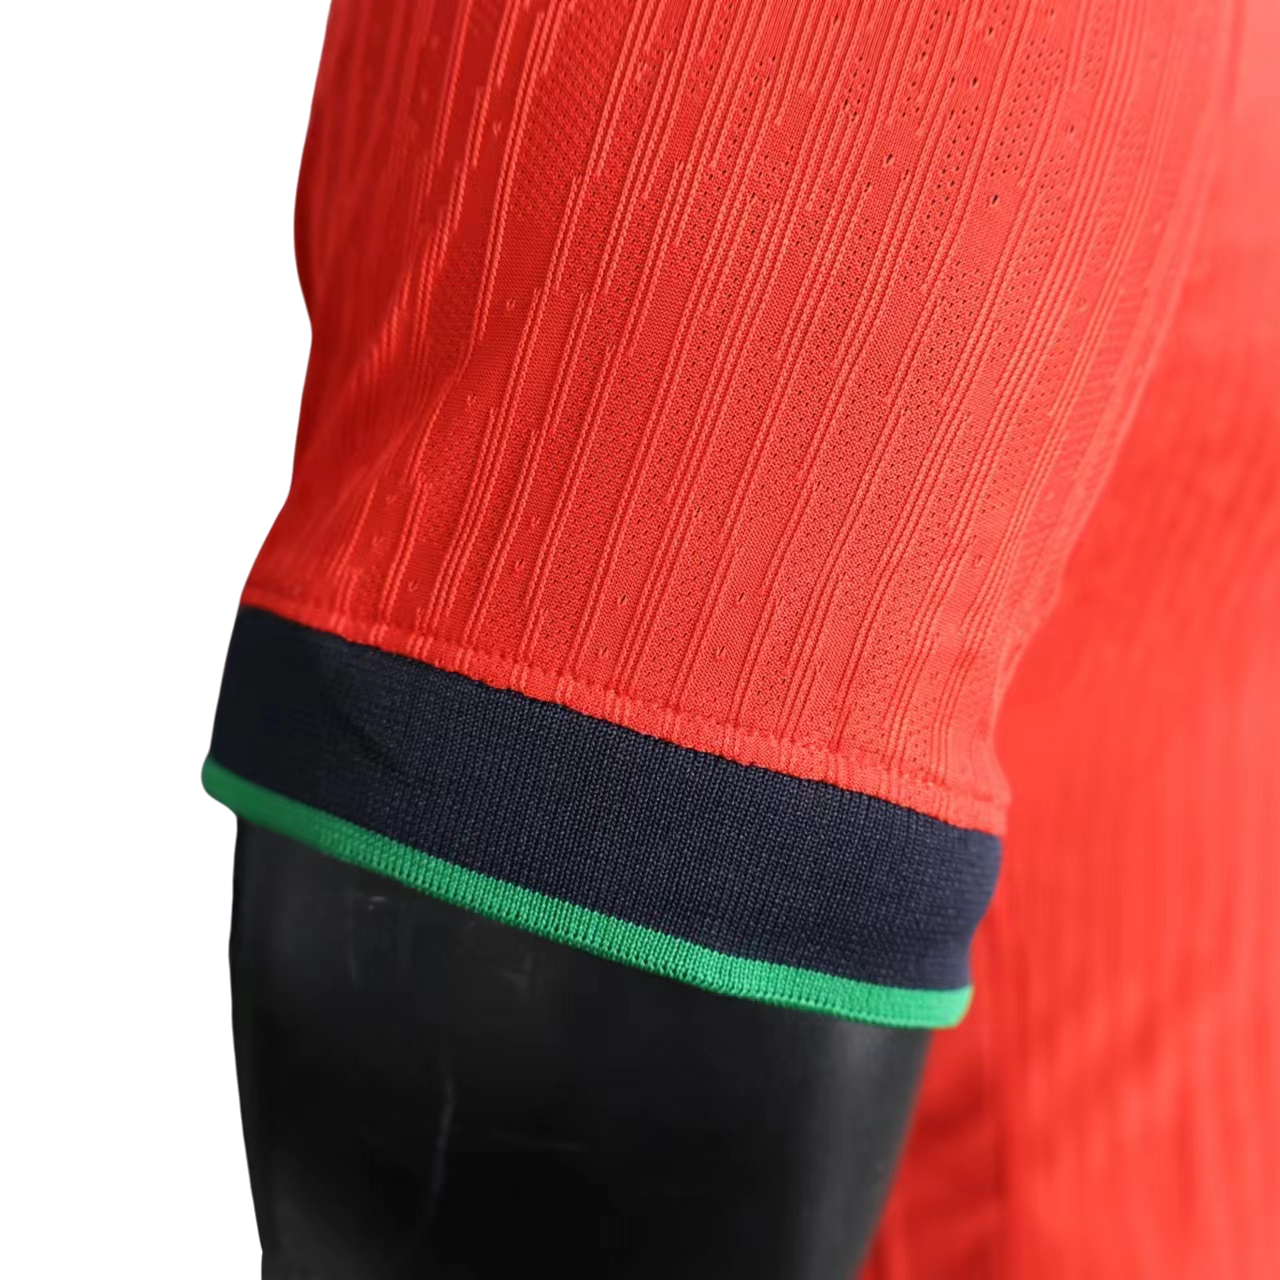 Portugal EURO 2024 Home kit – Player Version